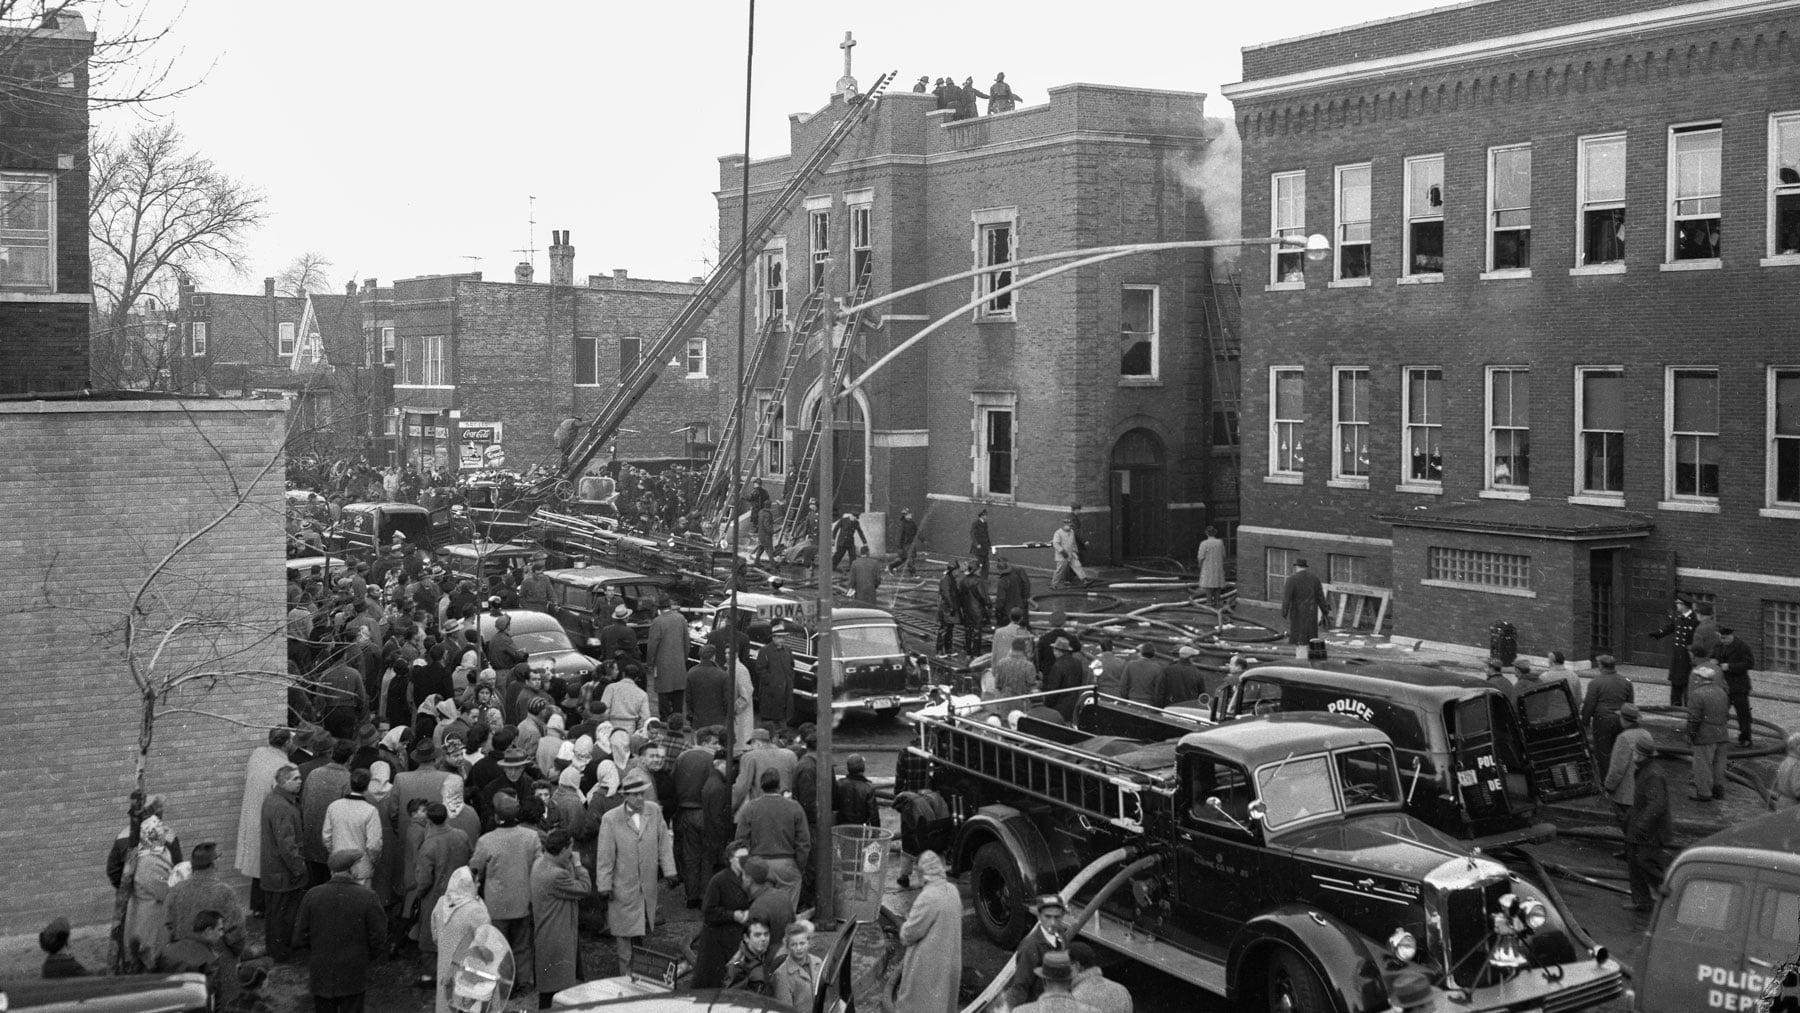 Historical photo of aftermath of Our Lady of the Angels fire with fire trucks and a lot of people in the street